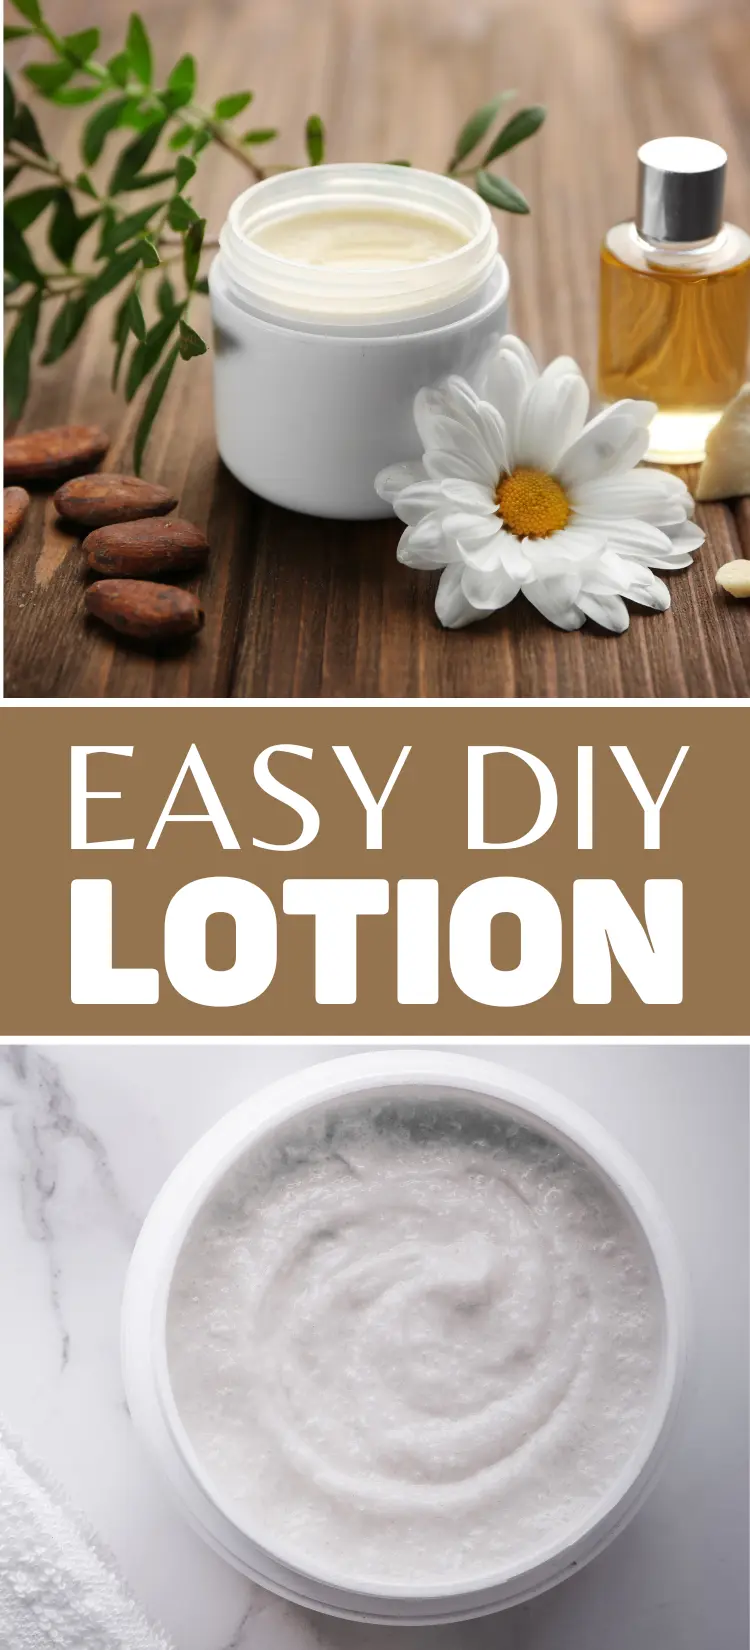 easy diy lotion photo of homemade lotion